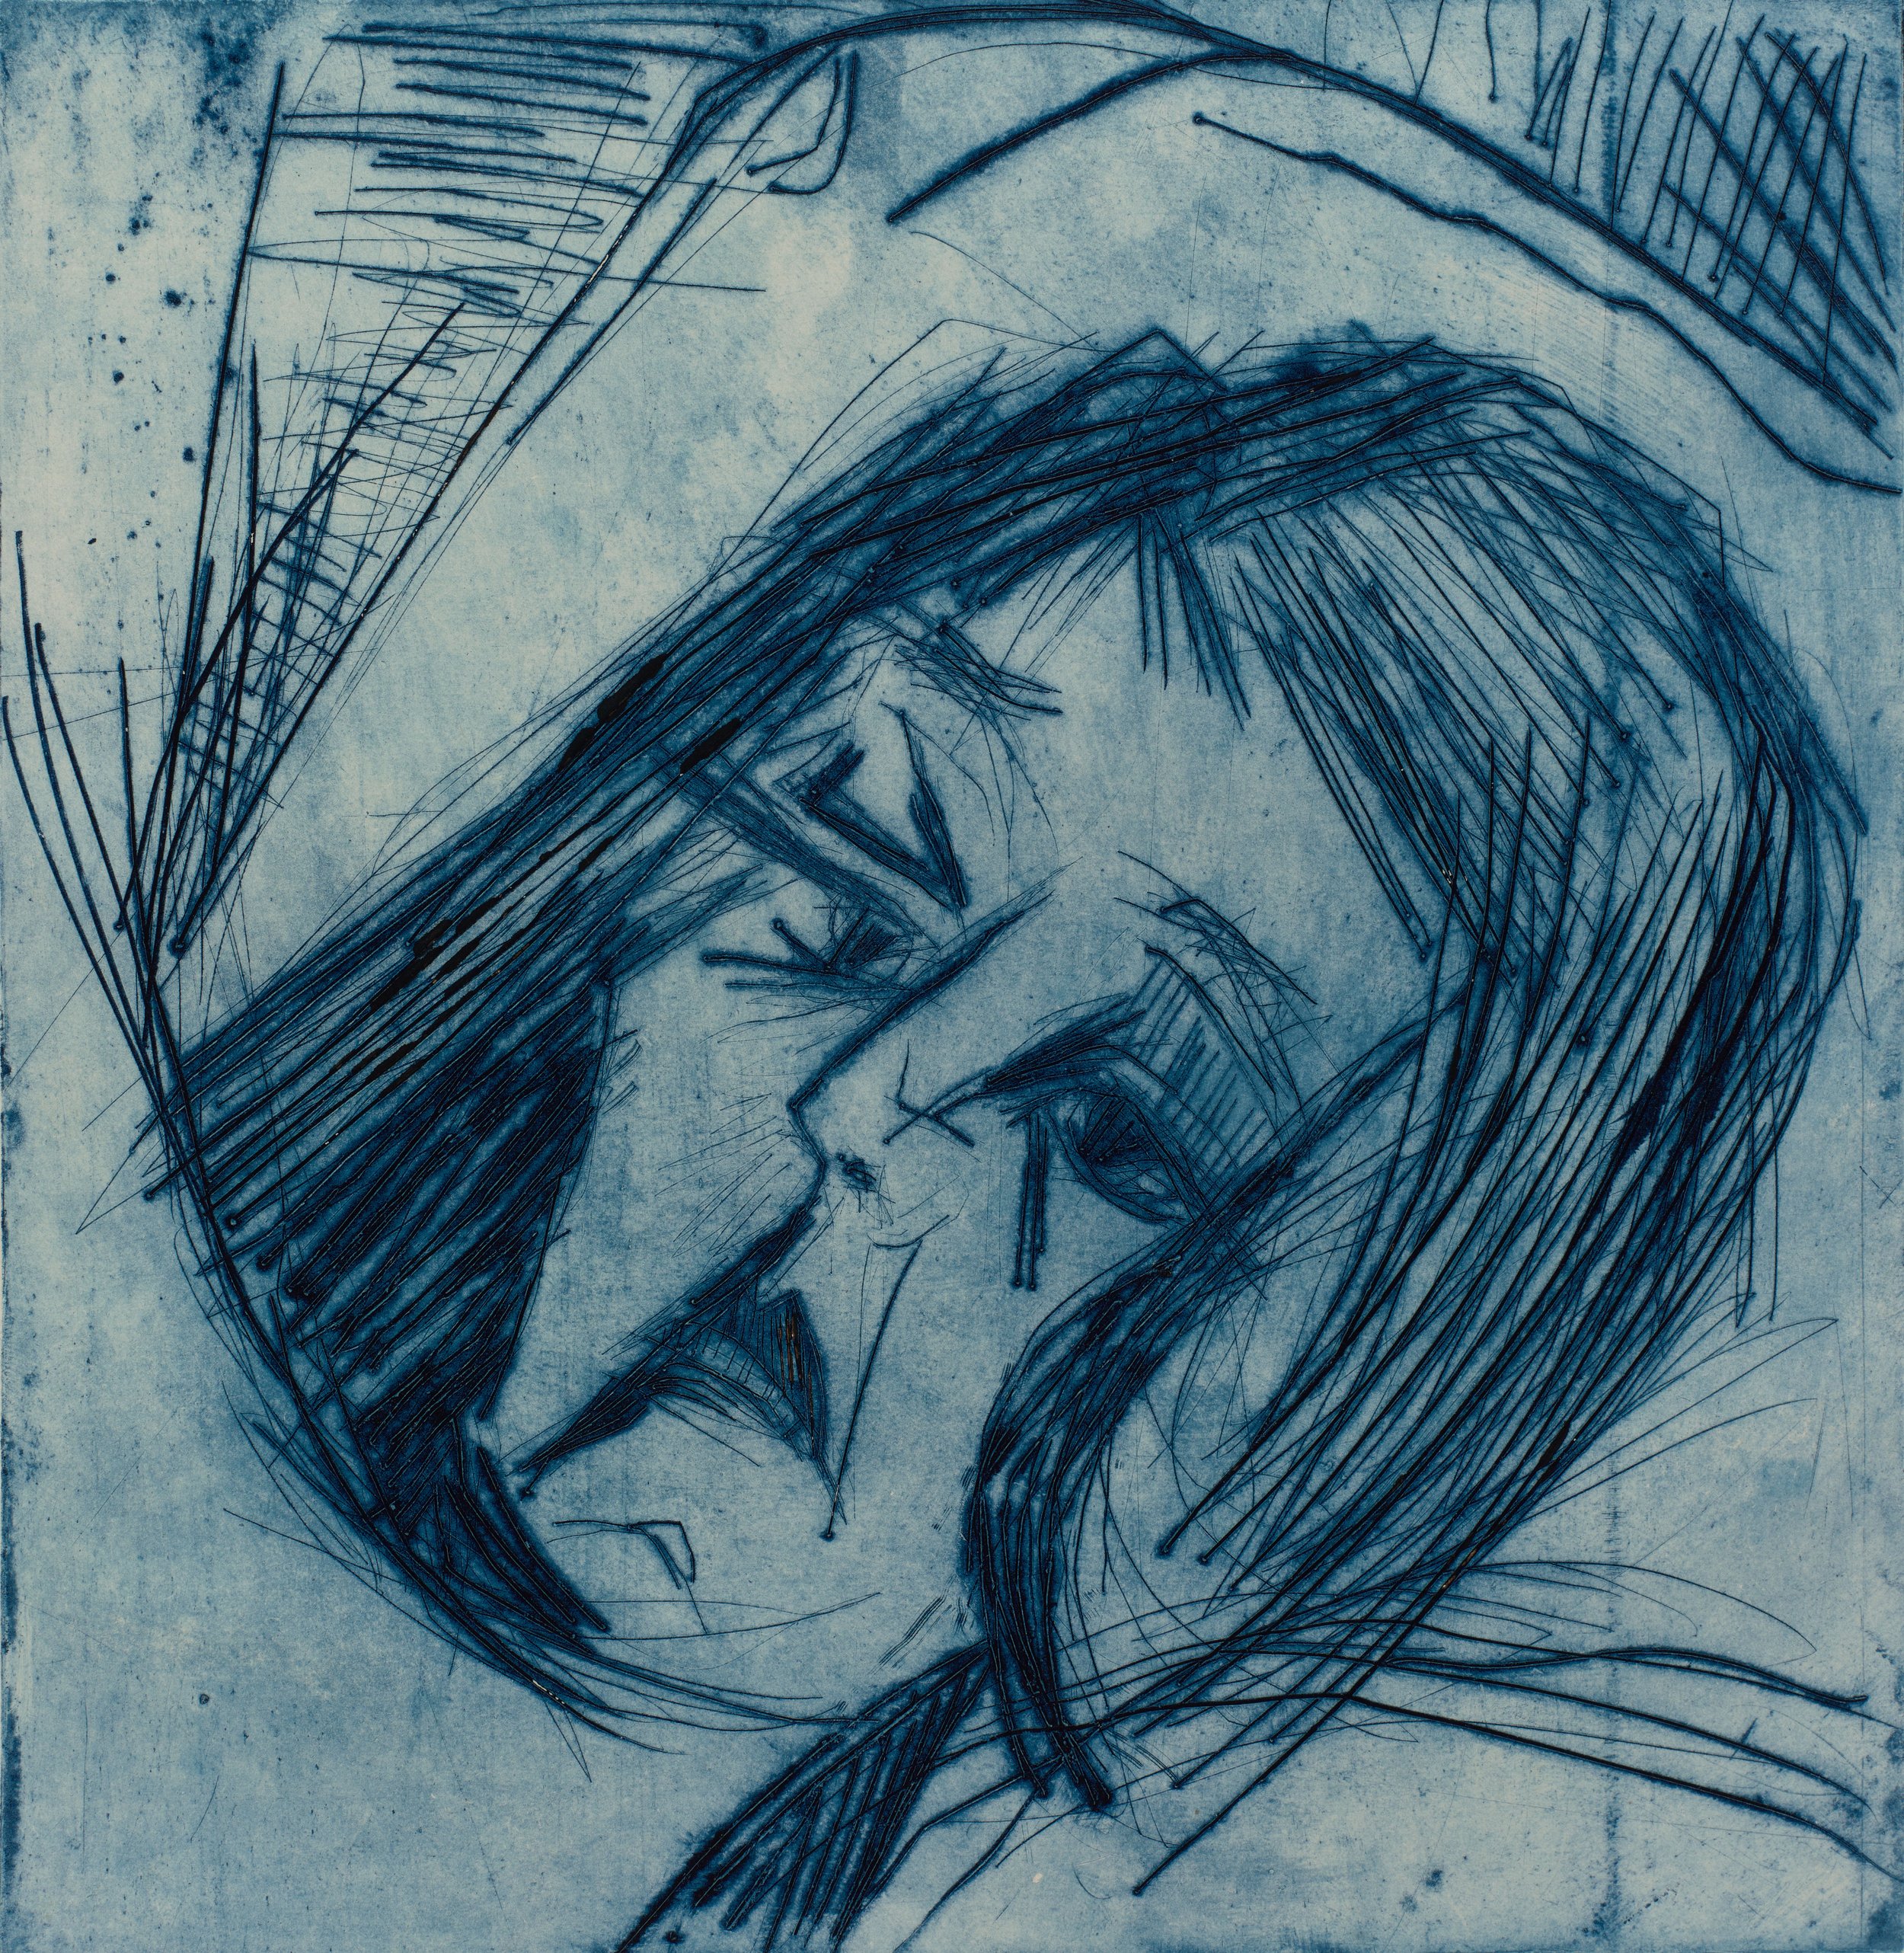  Ernst Ludwig Kirchner (Germany, 1880-1938),  Head of a Maiden Lying (Liegender Mädchenkopf) , 1917, drypoint printed in blue on wove paper, 9 7/8 x 9 1/2 inches. Gift of David and Eva Bradford, 2013.29.6. Image courtesy of Luc Demers 